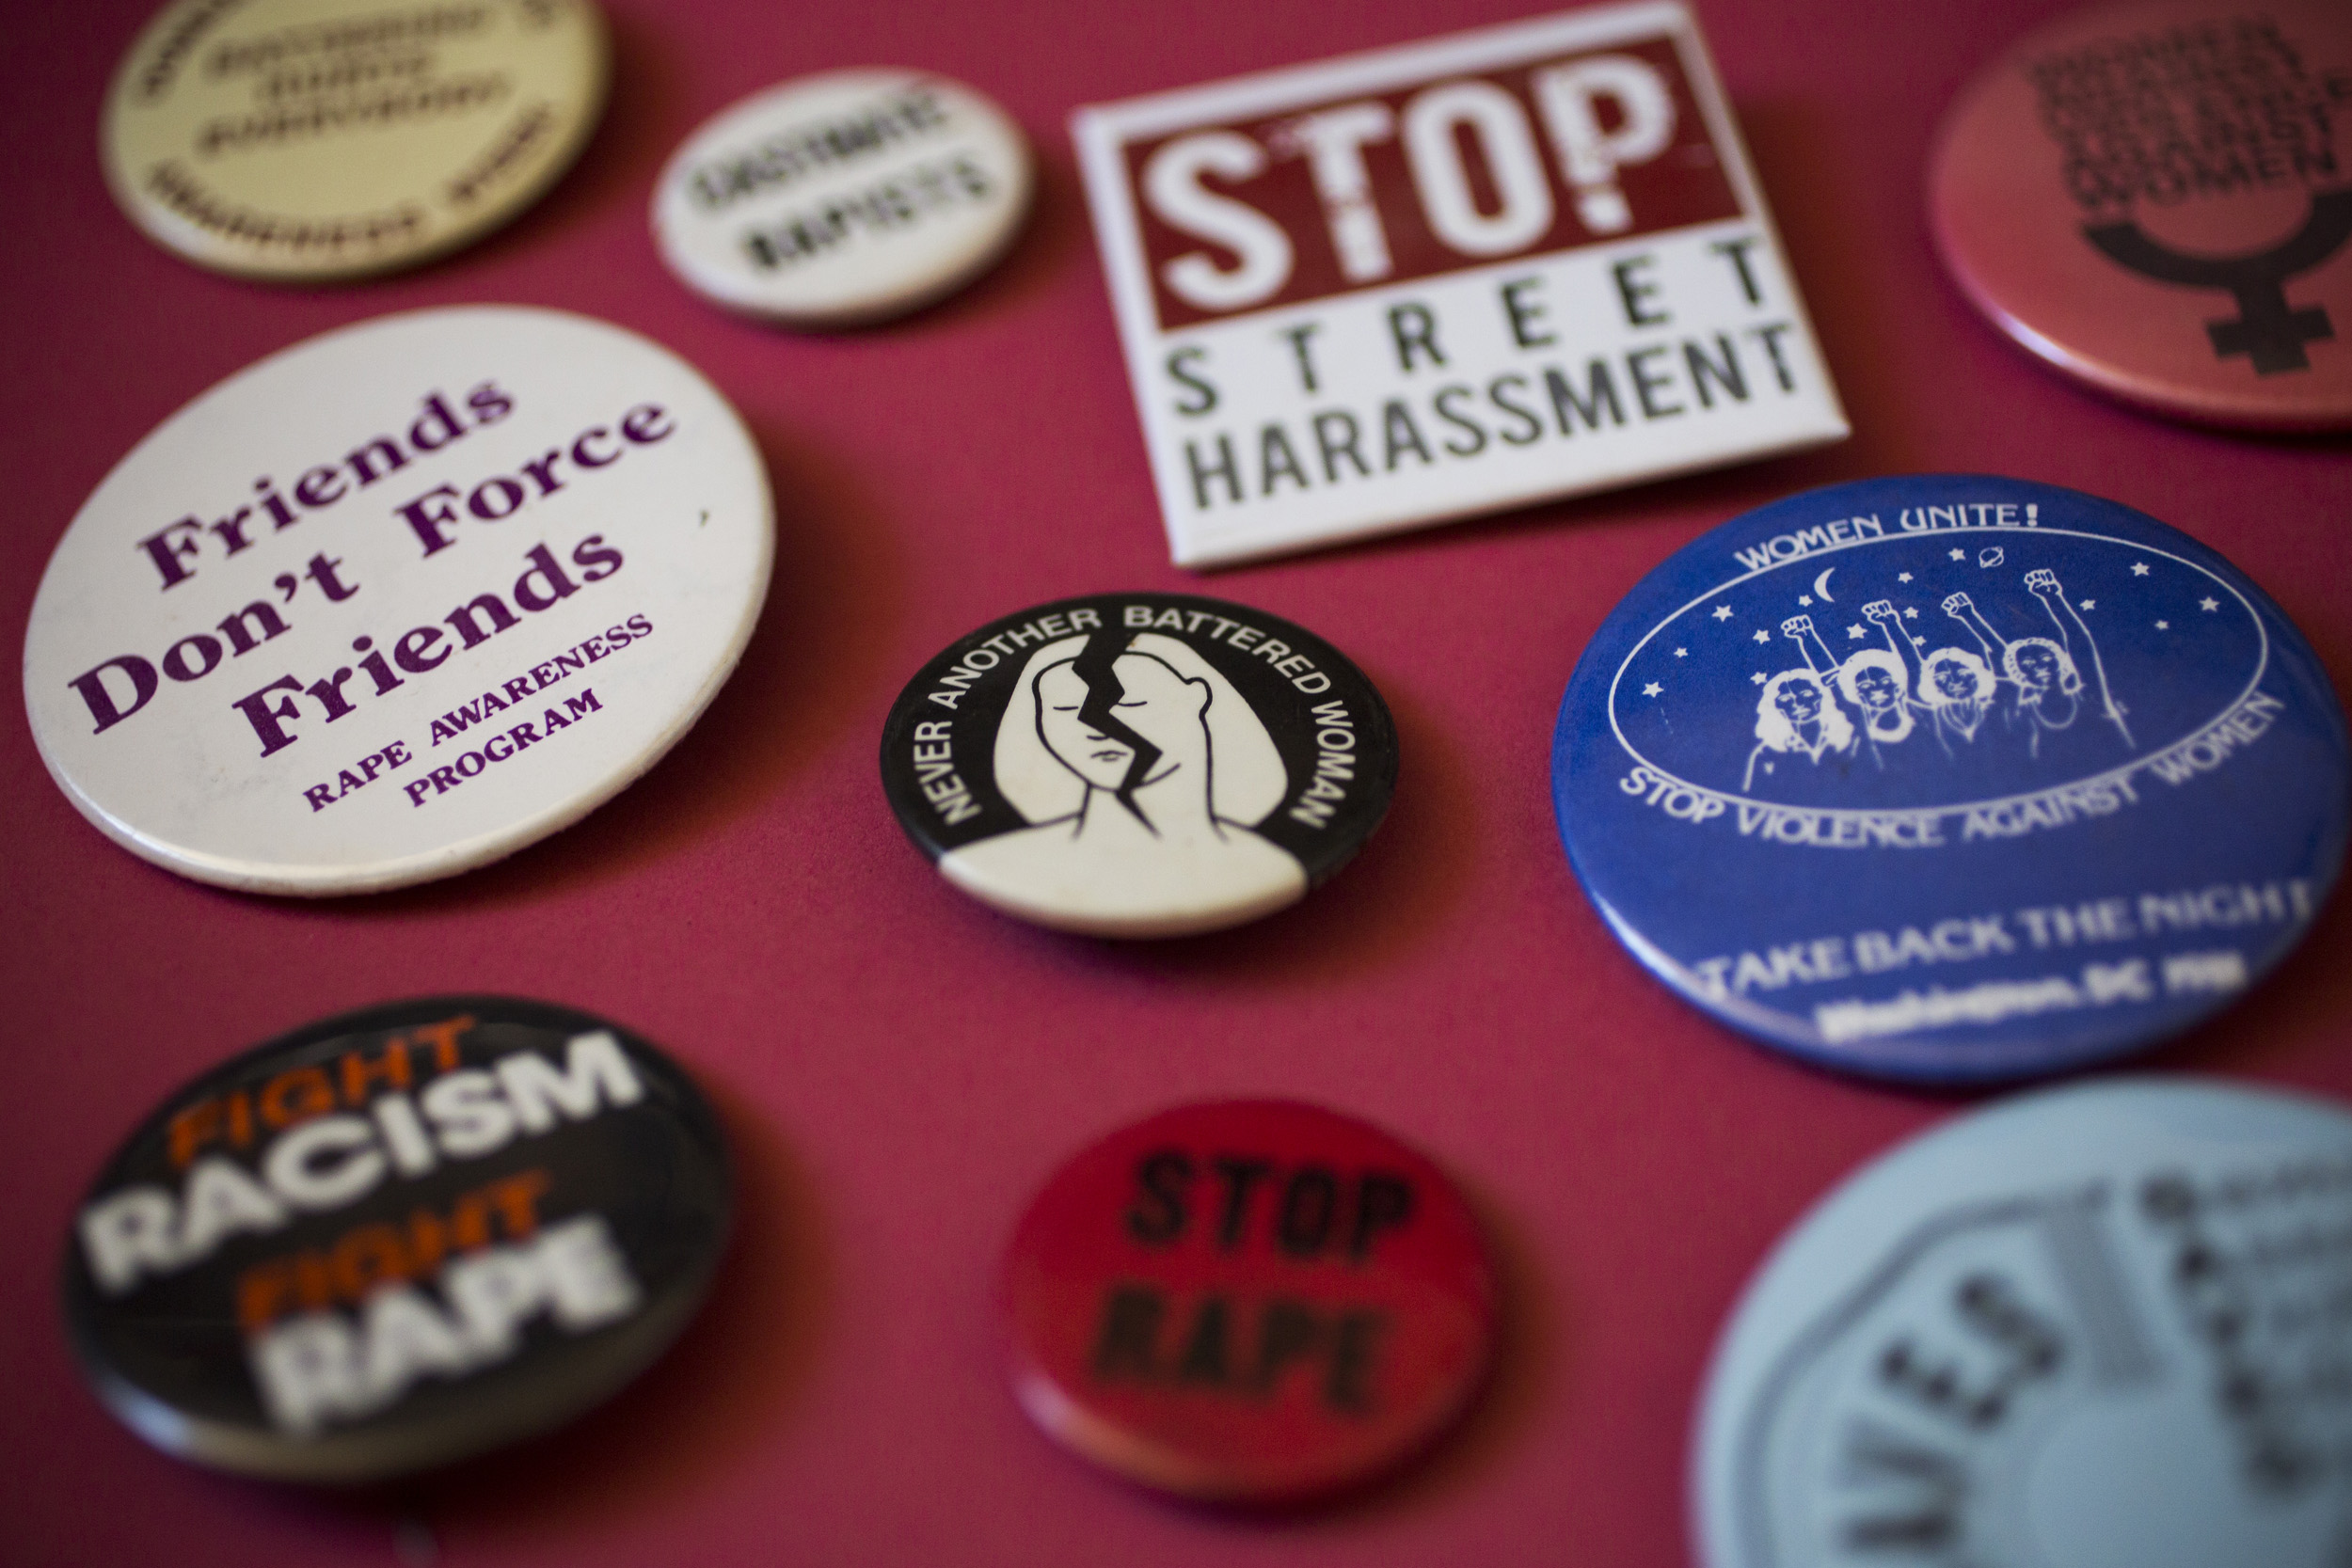 Stop Violence Against Women buttons.